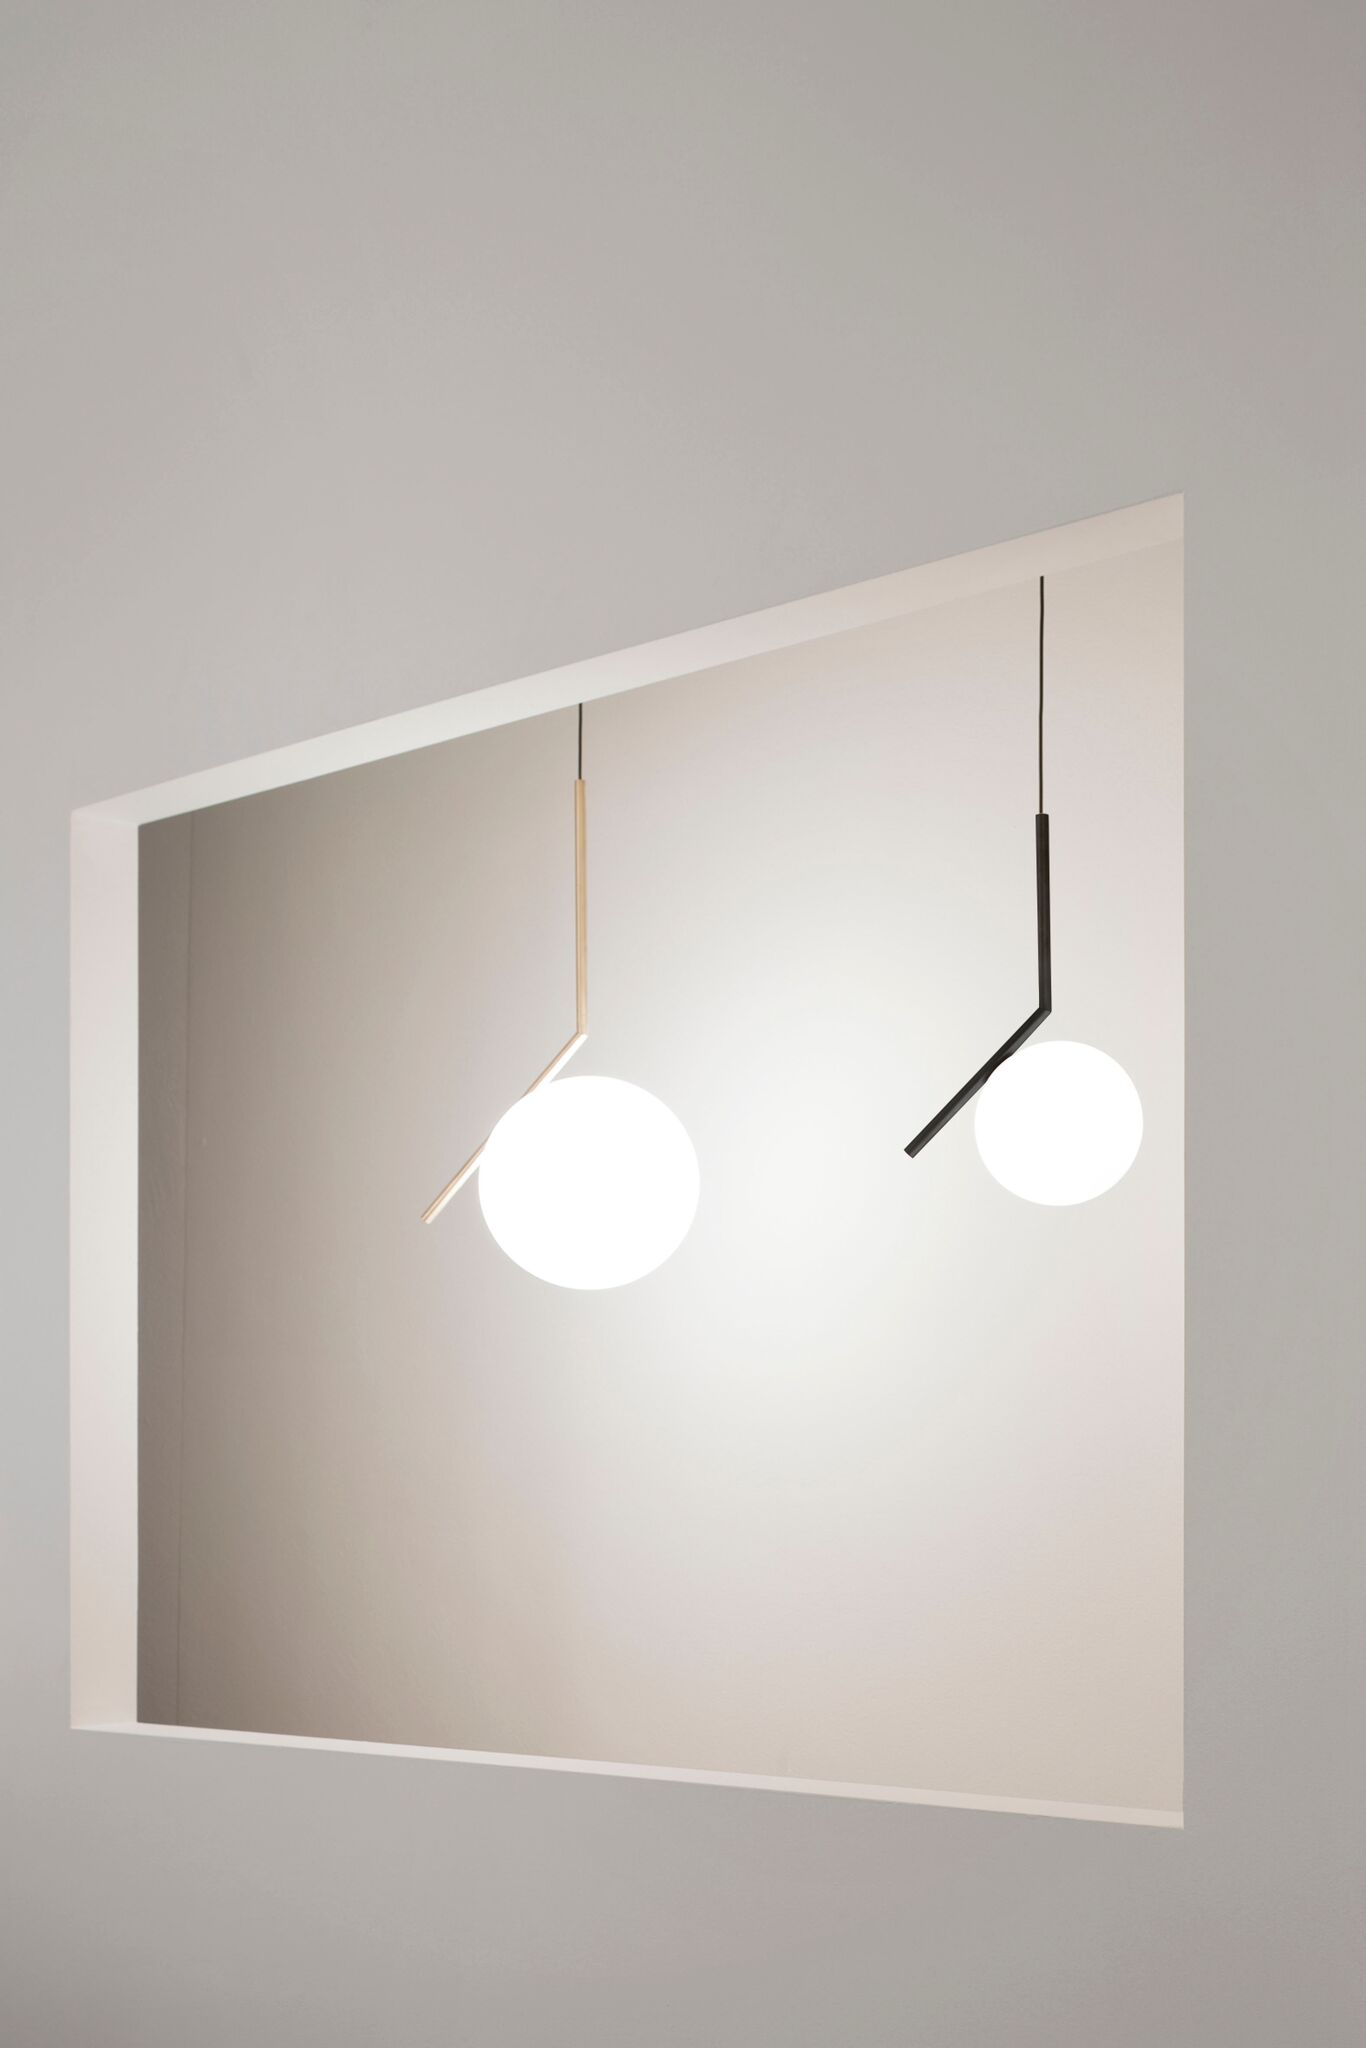 Two Flos IC Lights Ceiling black and brass finish